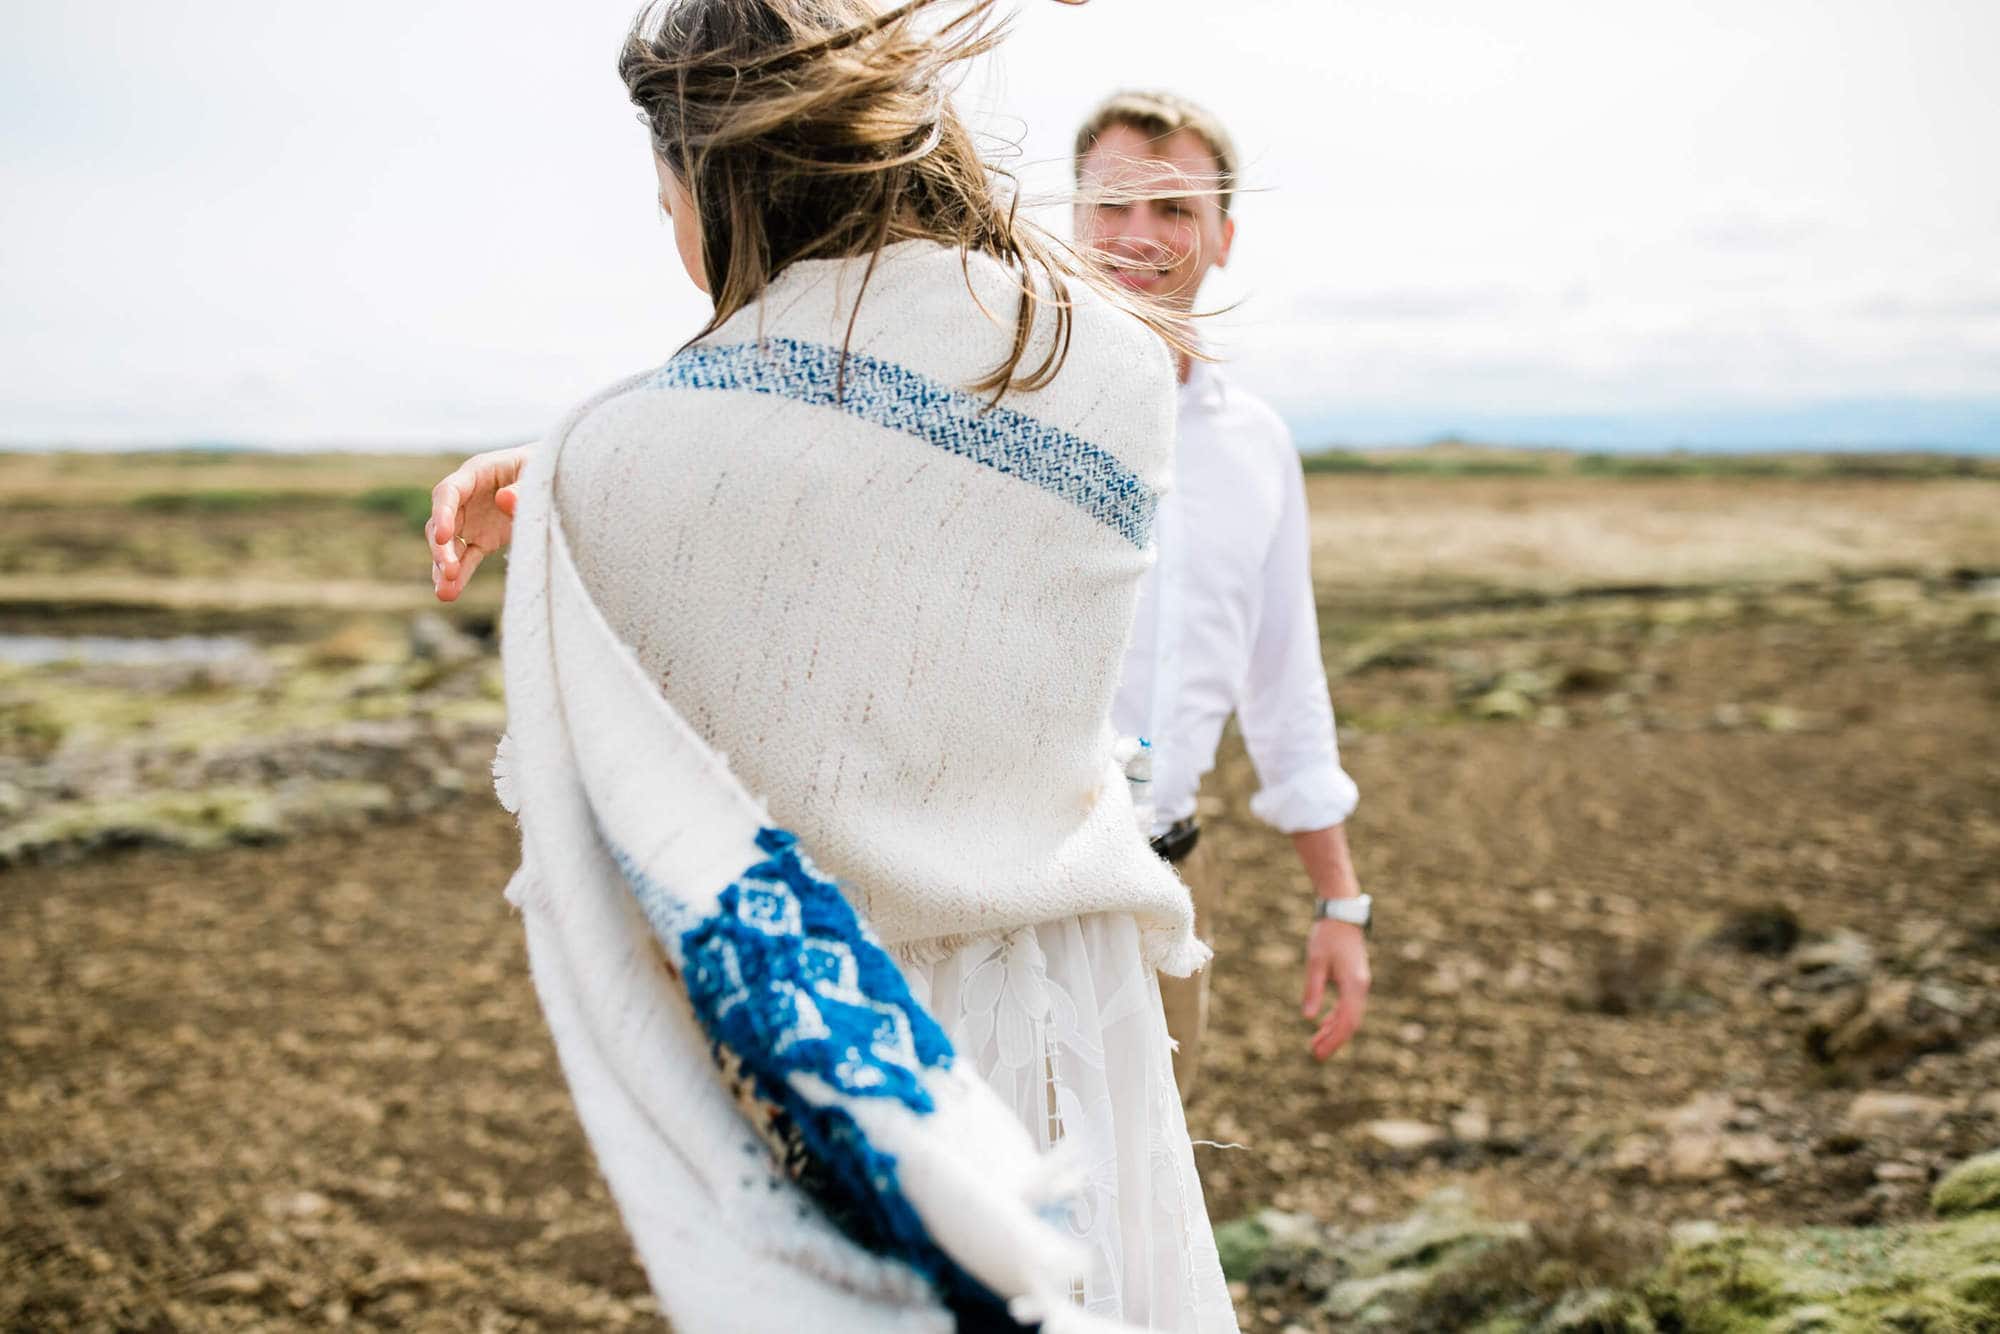 This fun and romantic Iceland Adventure Elopement shoot in Borgarnes was the perfect introduction to Iceland for this adventerous couple!